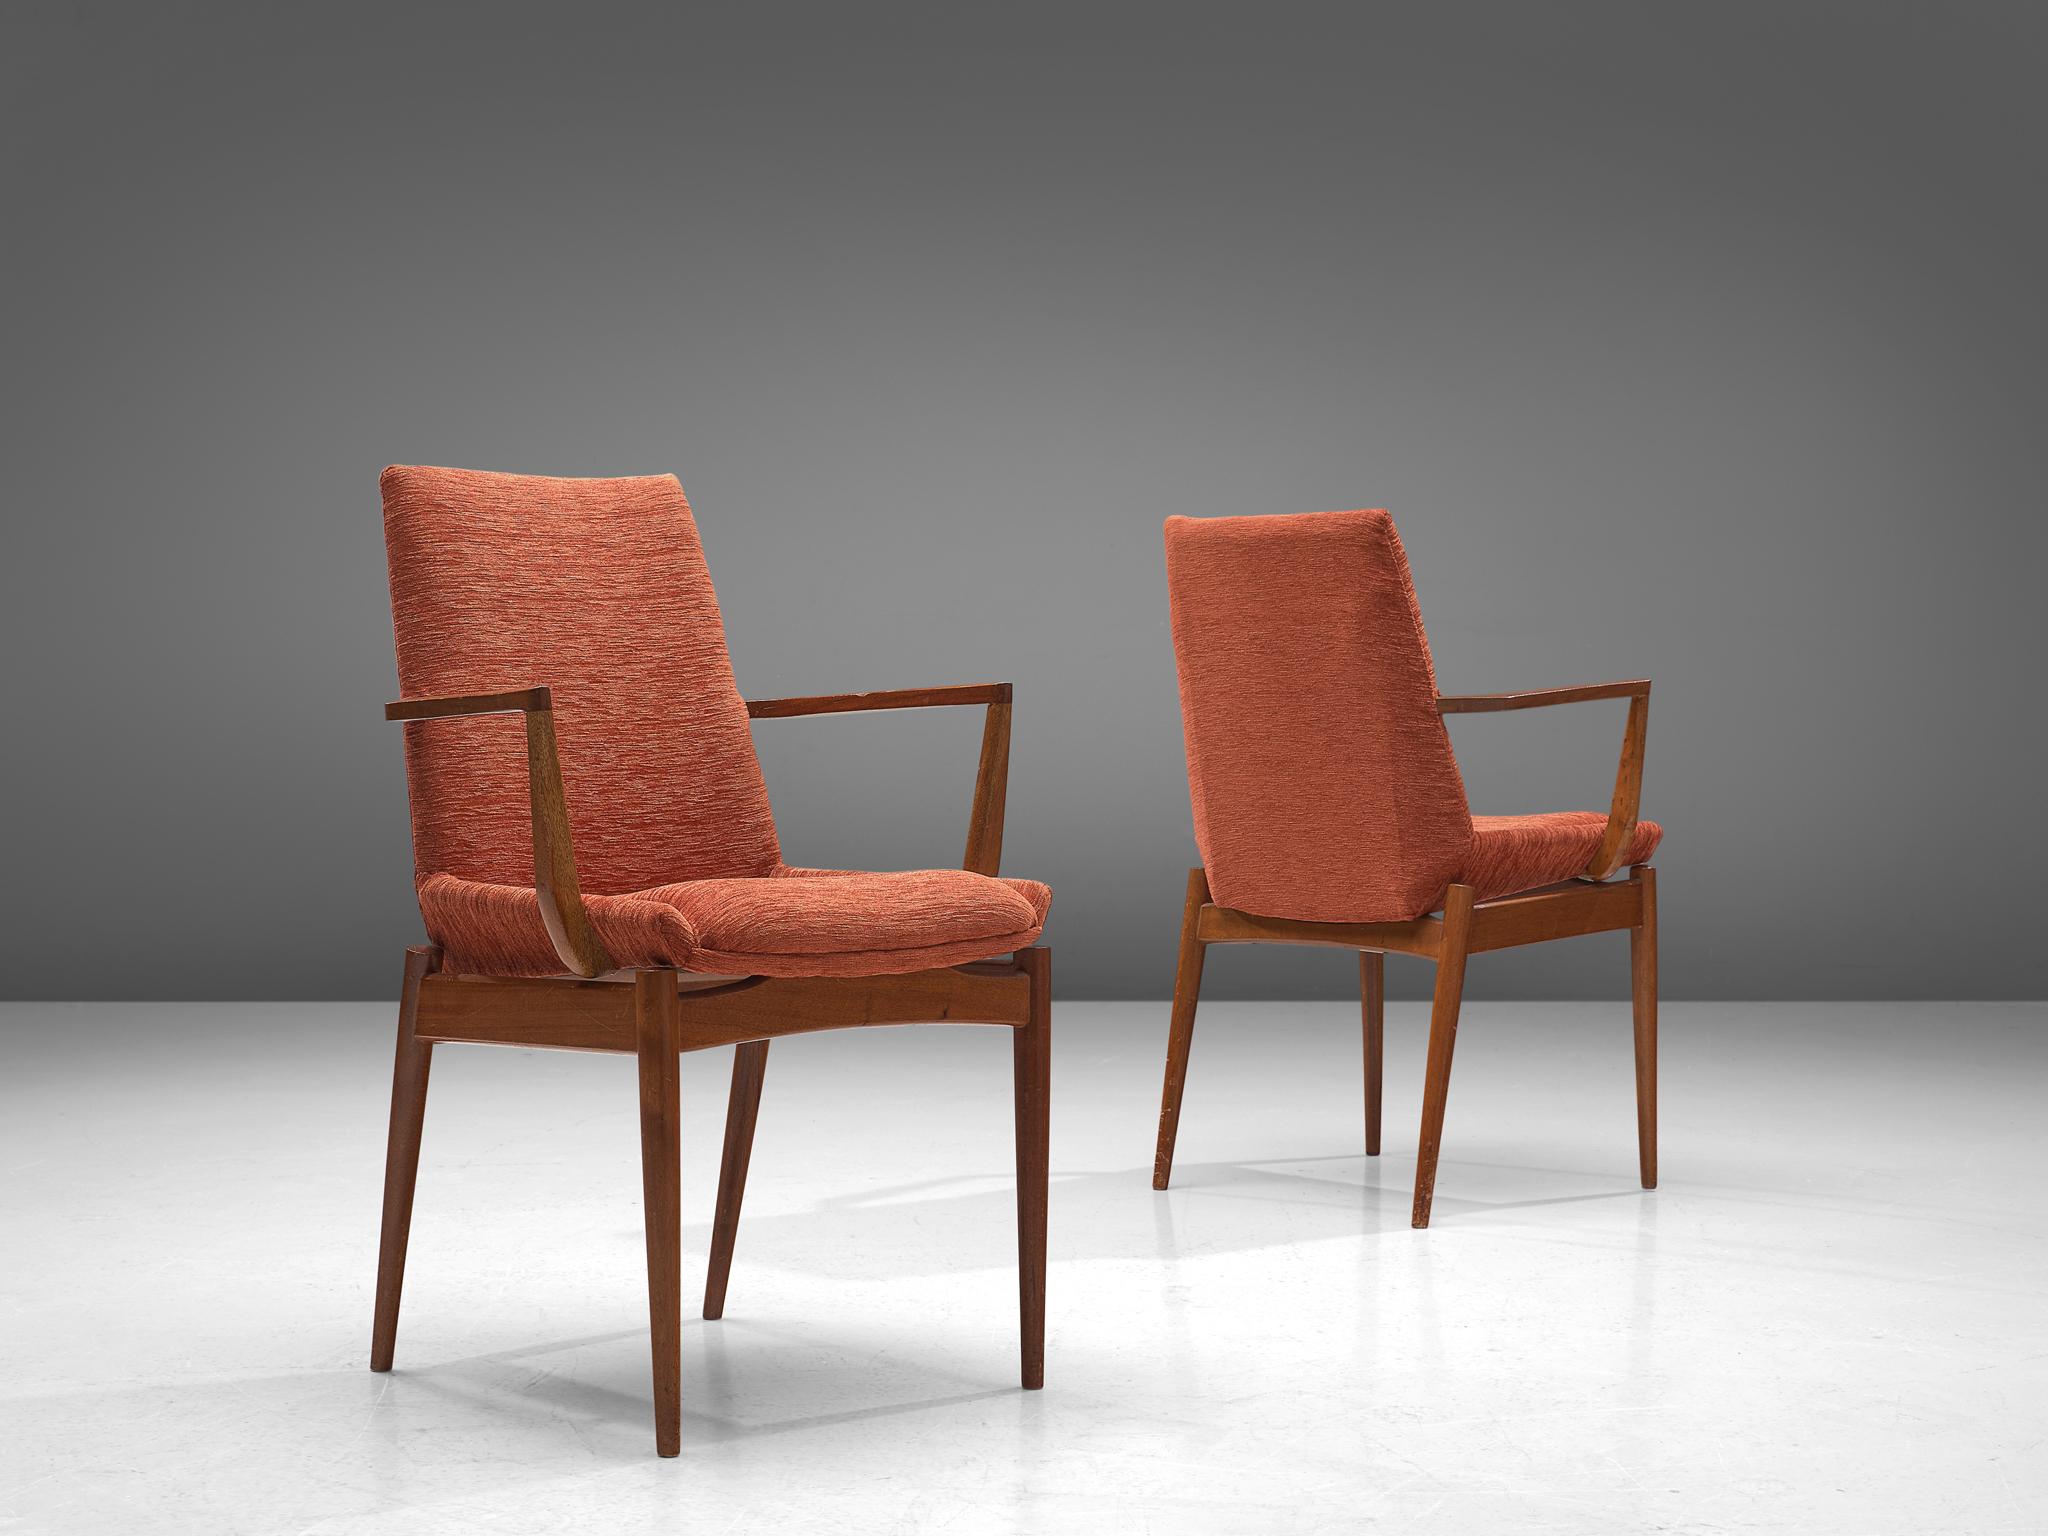 Armchairs, teak, red orange corduroy, Scandinavia, 1950s

The two armchairs are sculptural and elegant. The design features a high, sculpted back. The curved, tapered legs are another main feature of the chairs. The main feature of this set is the